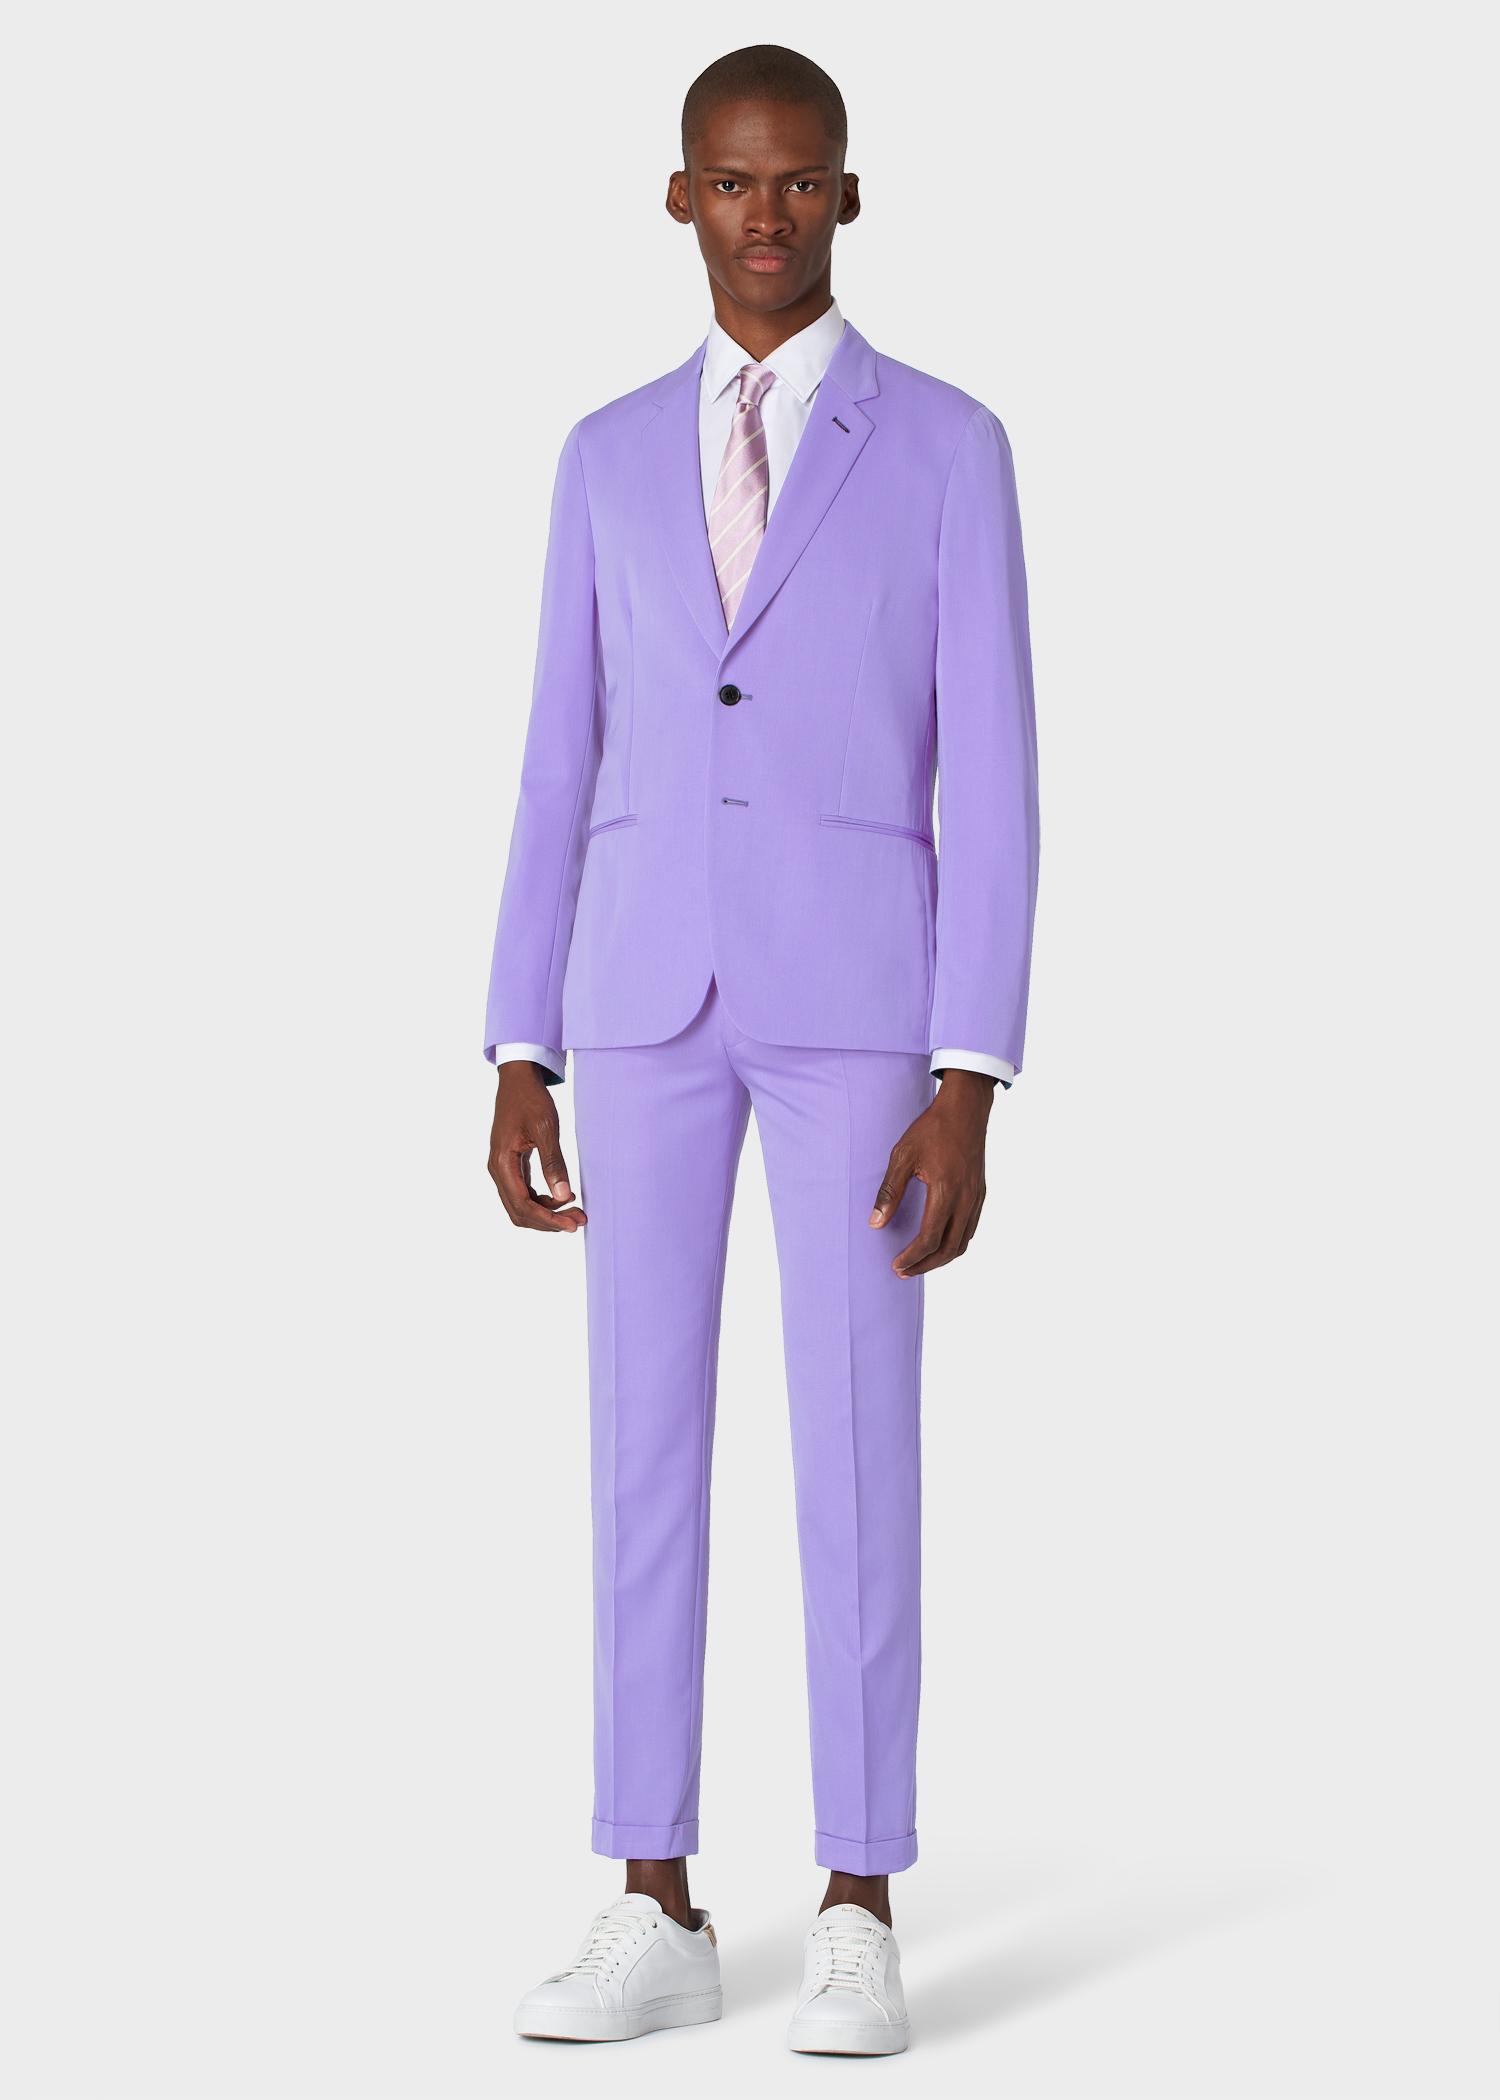 Paul Smith Tailored-fit Lilac Unlined Wool Blazer in Purple for Men - Lyst